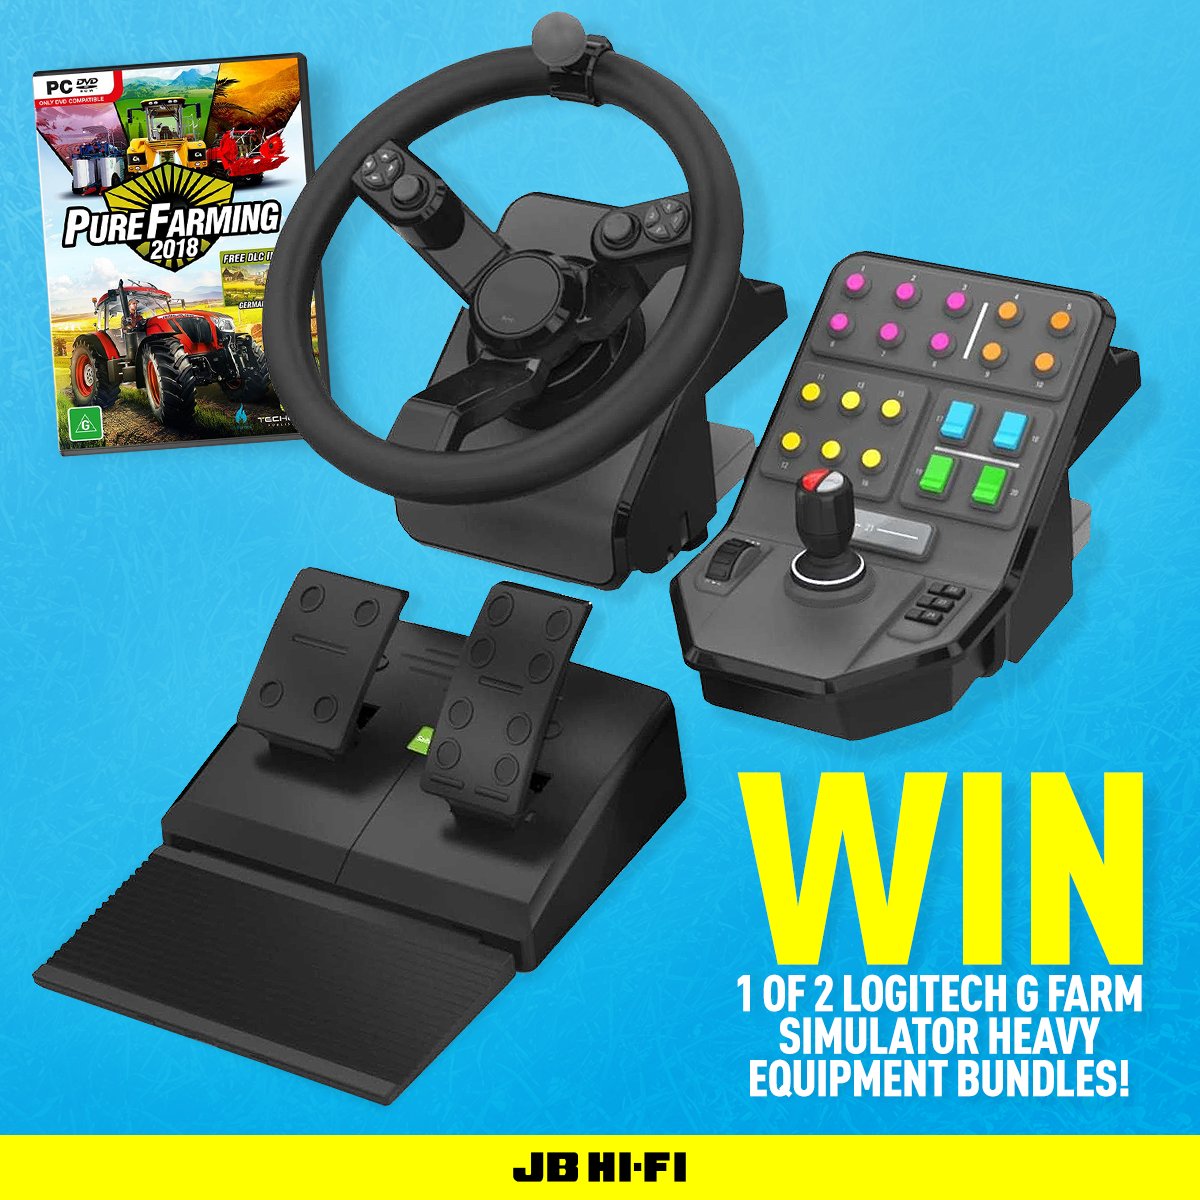 JB Hi-Fi on X: Live the farming life from the comfort of your gaming  chair! @JBHiFi have 2 @LogitechG_ANZ Farm Simulator Heavy Equipment Bundles  including a copy of #PureFarming2018 to give away!!